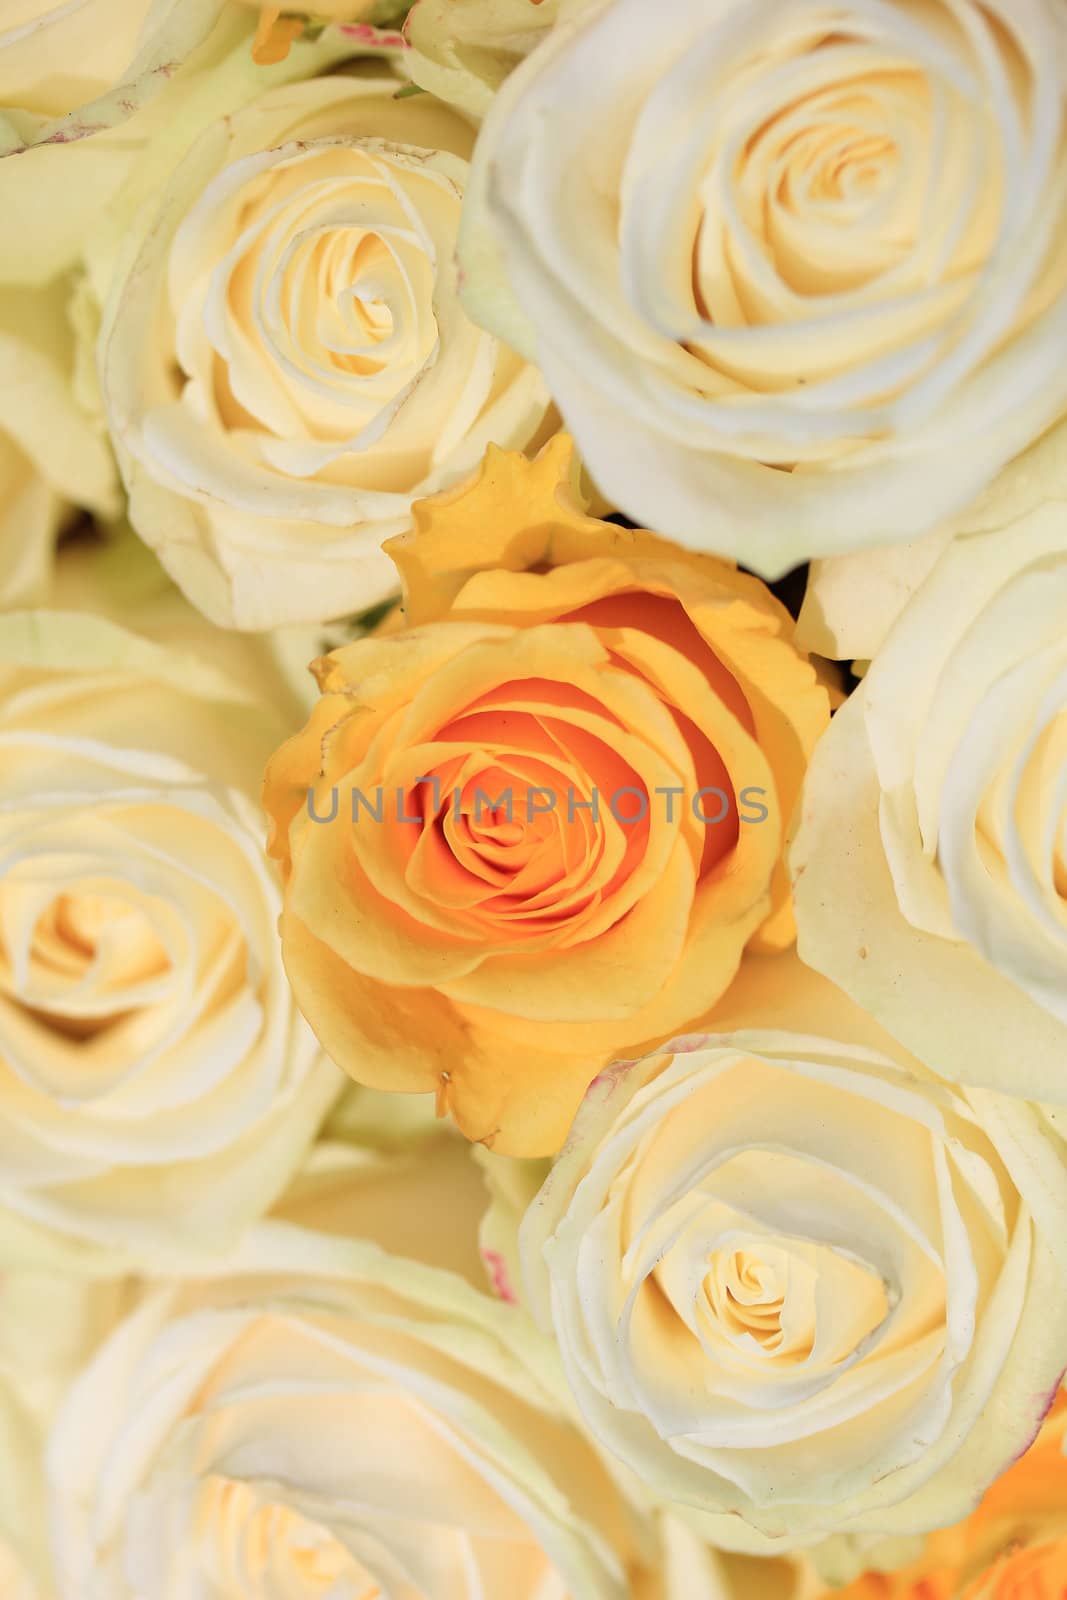 White and yellow roses in brdal flower arrangement by studioportosabbia